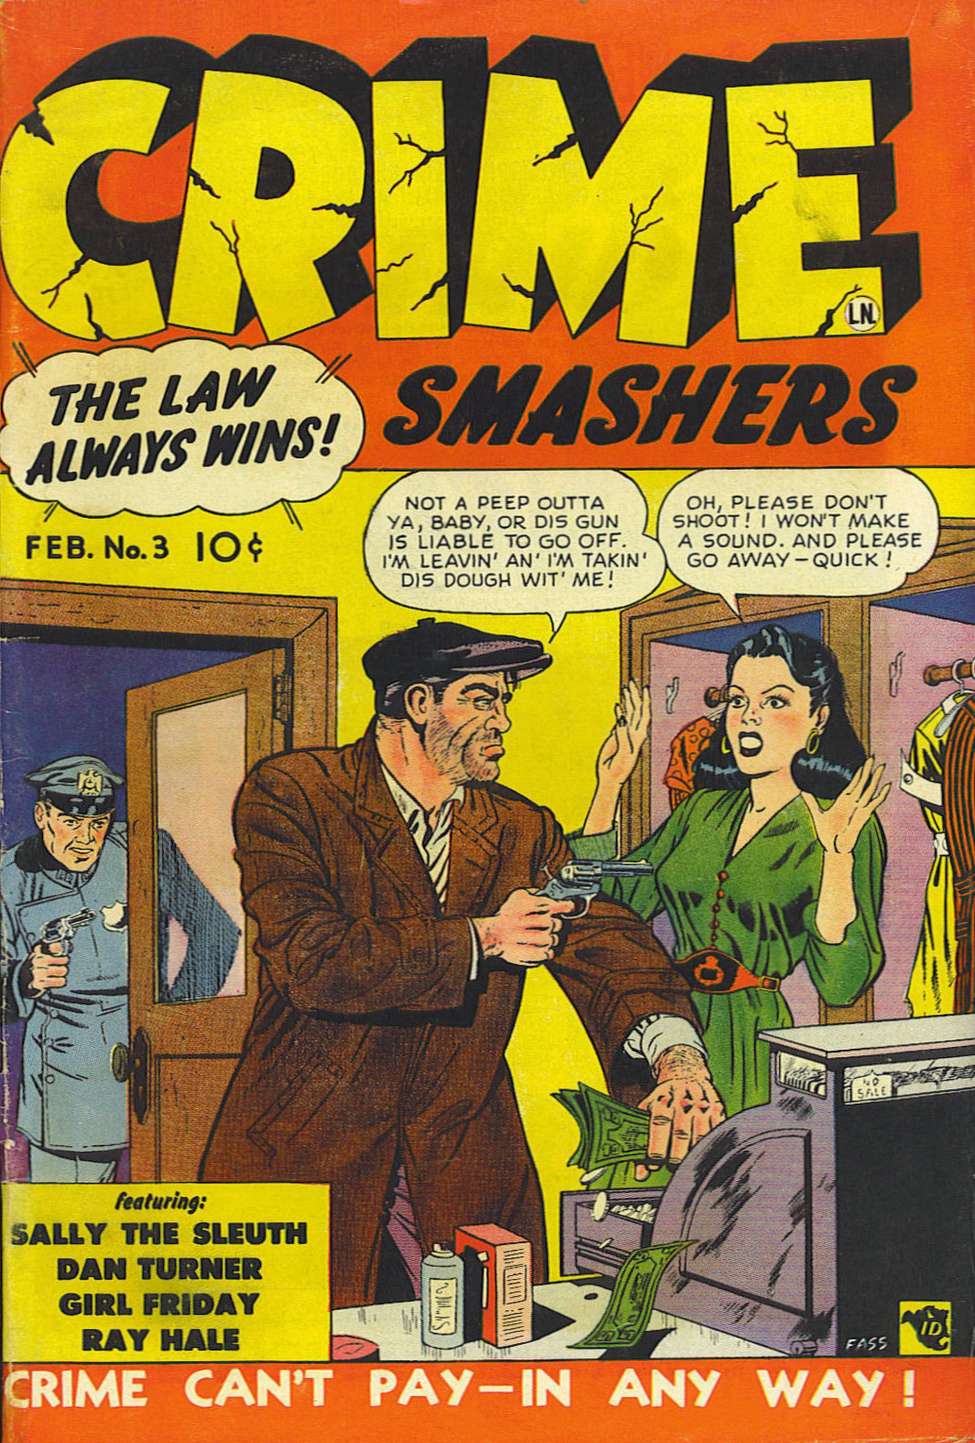 Comic Book Cover For Crime Smashers 3 (alt)